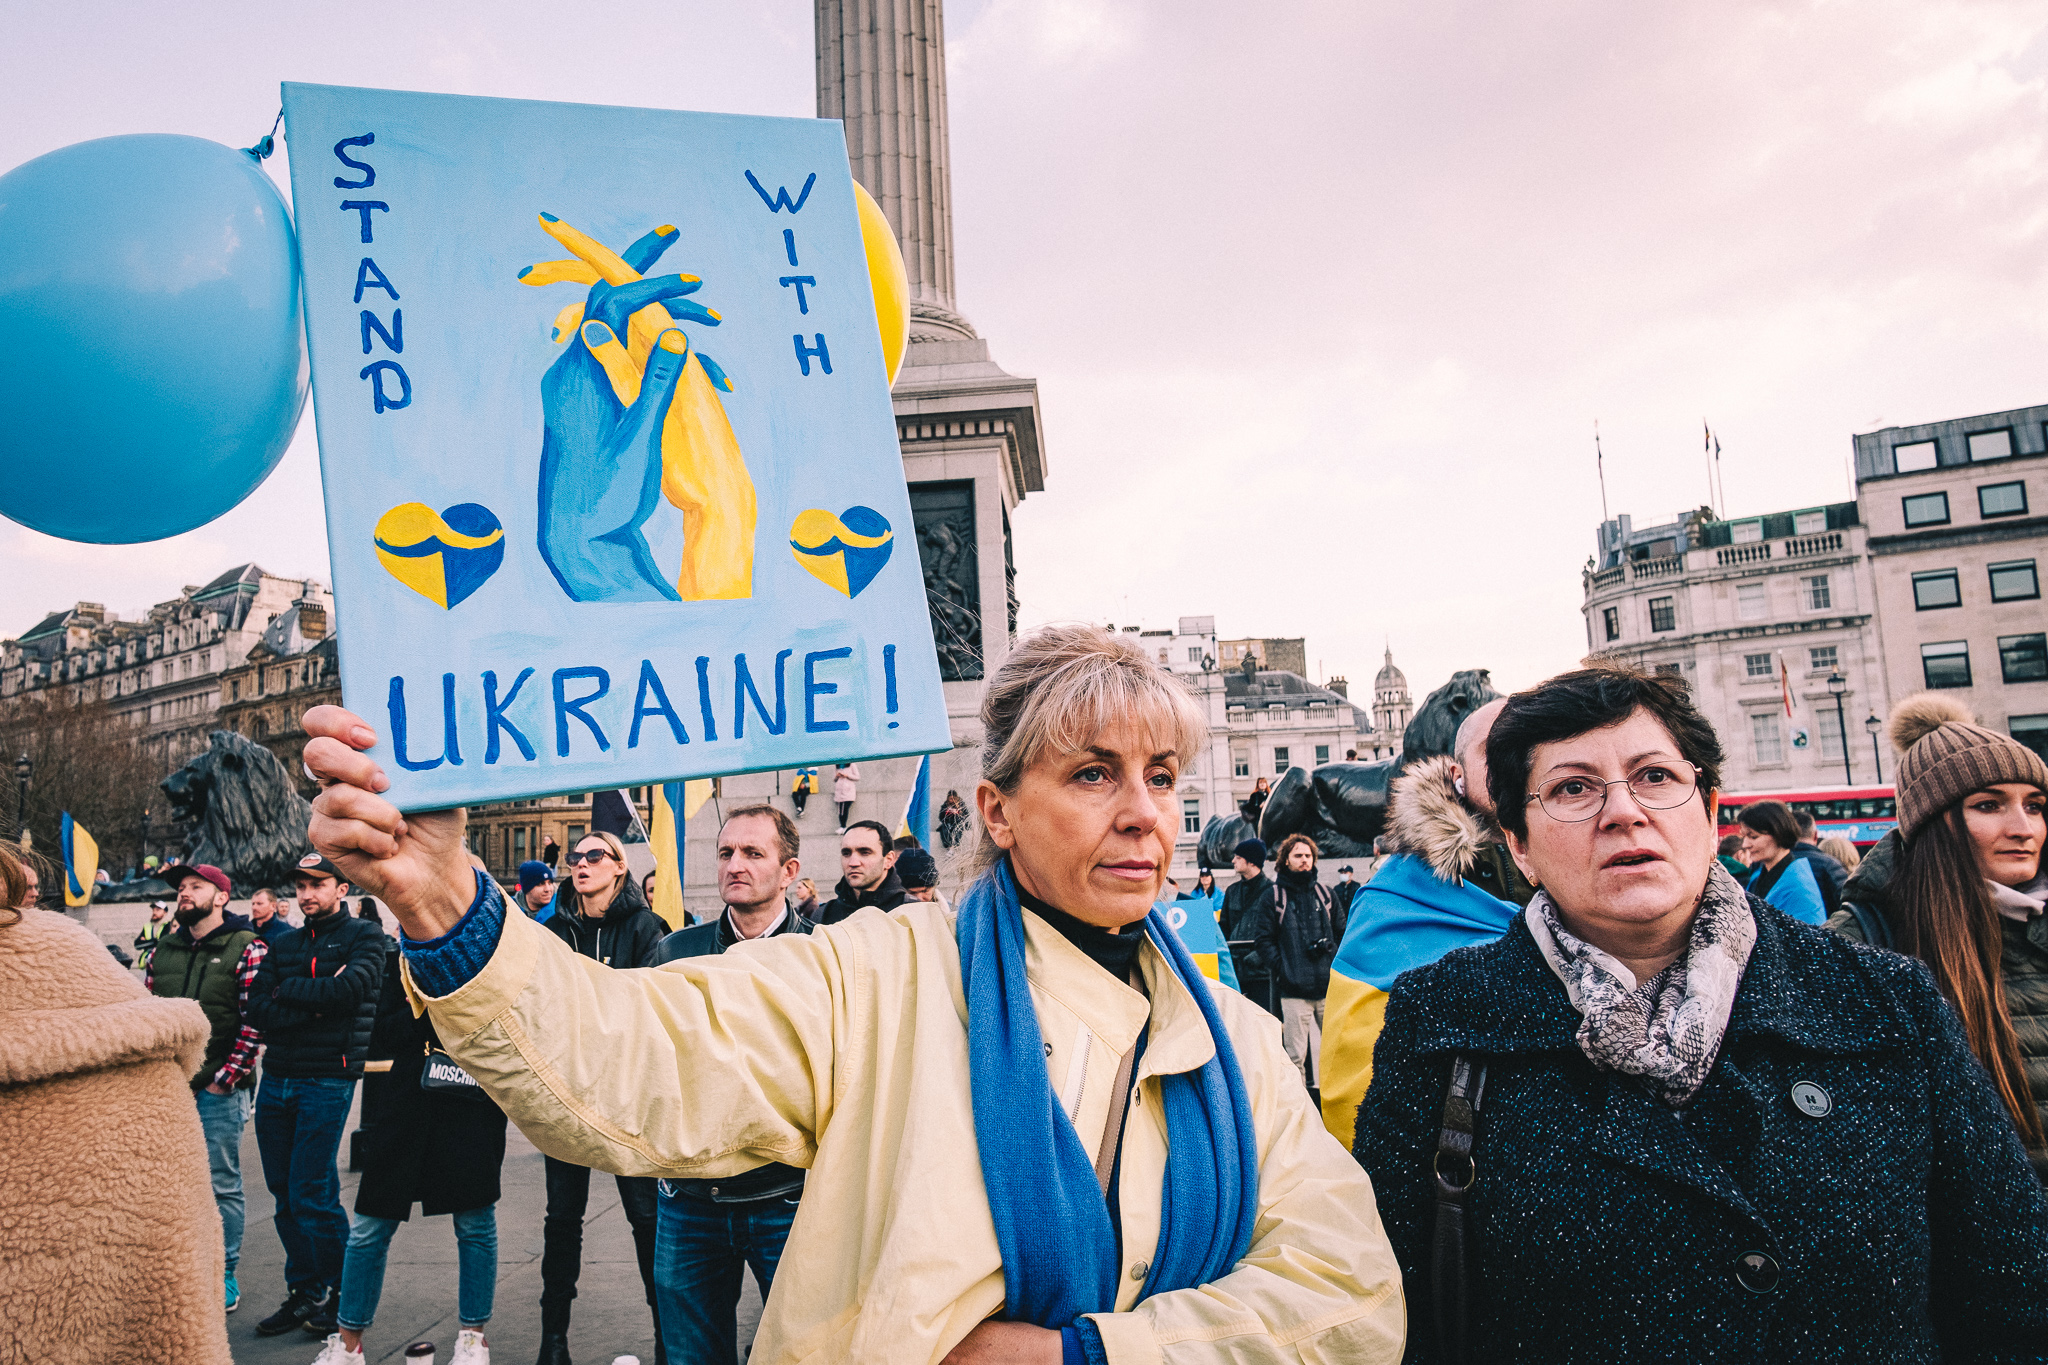 A protester holding a sign that reads: "Stand with Ukraine"